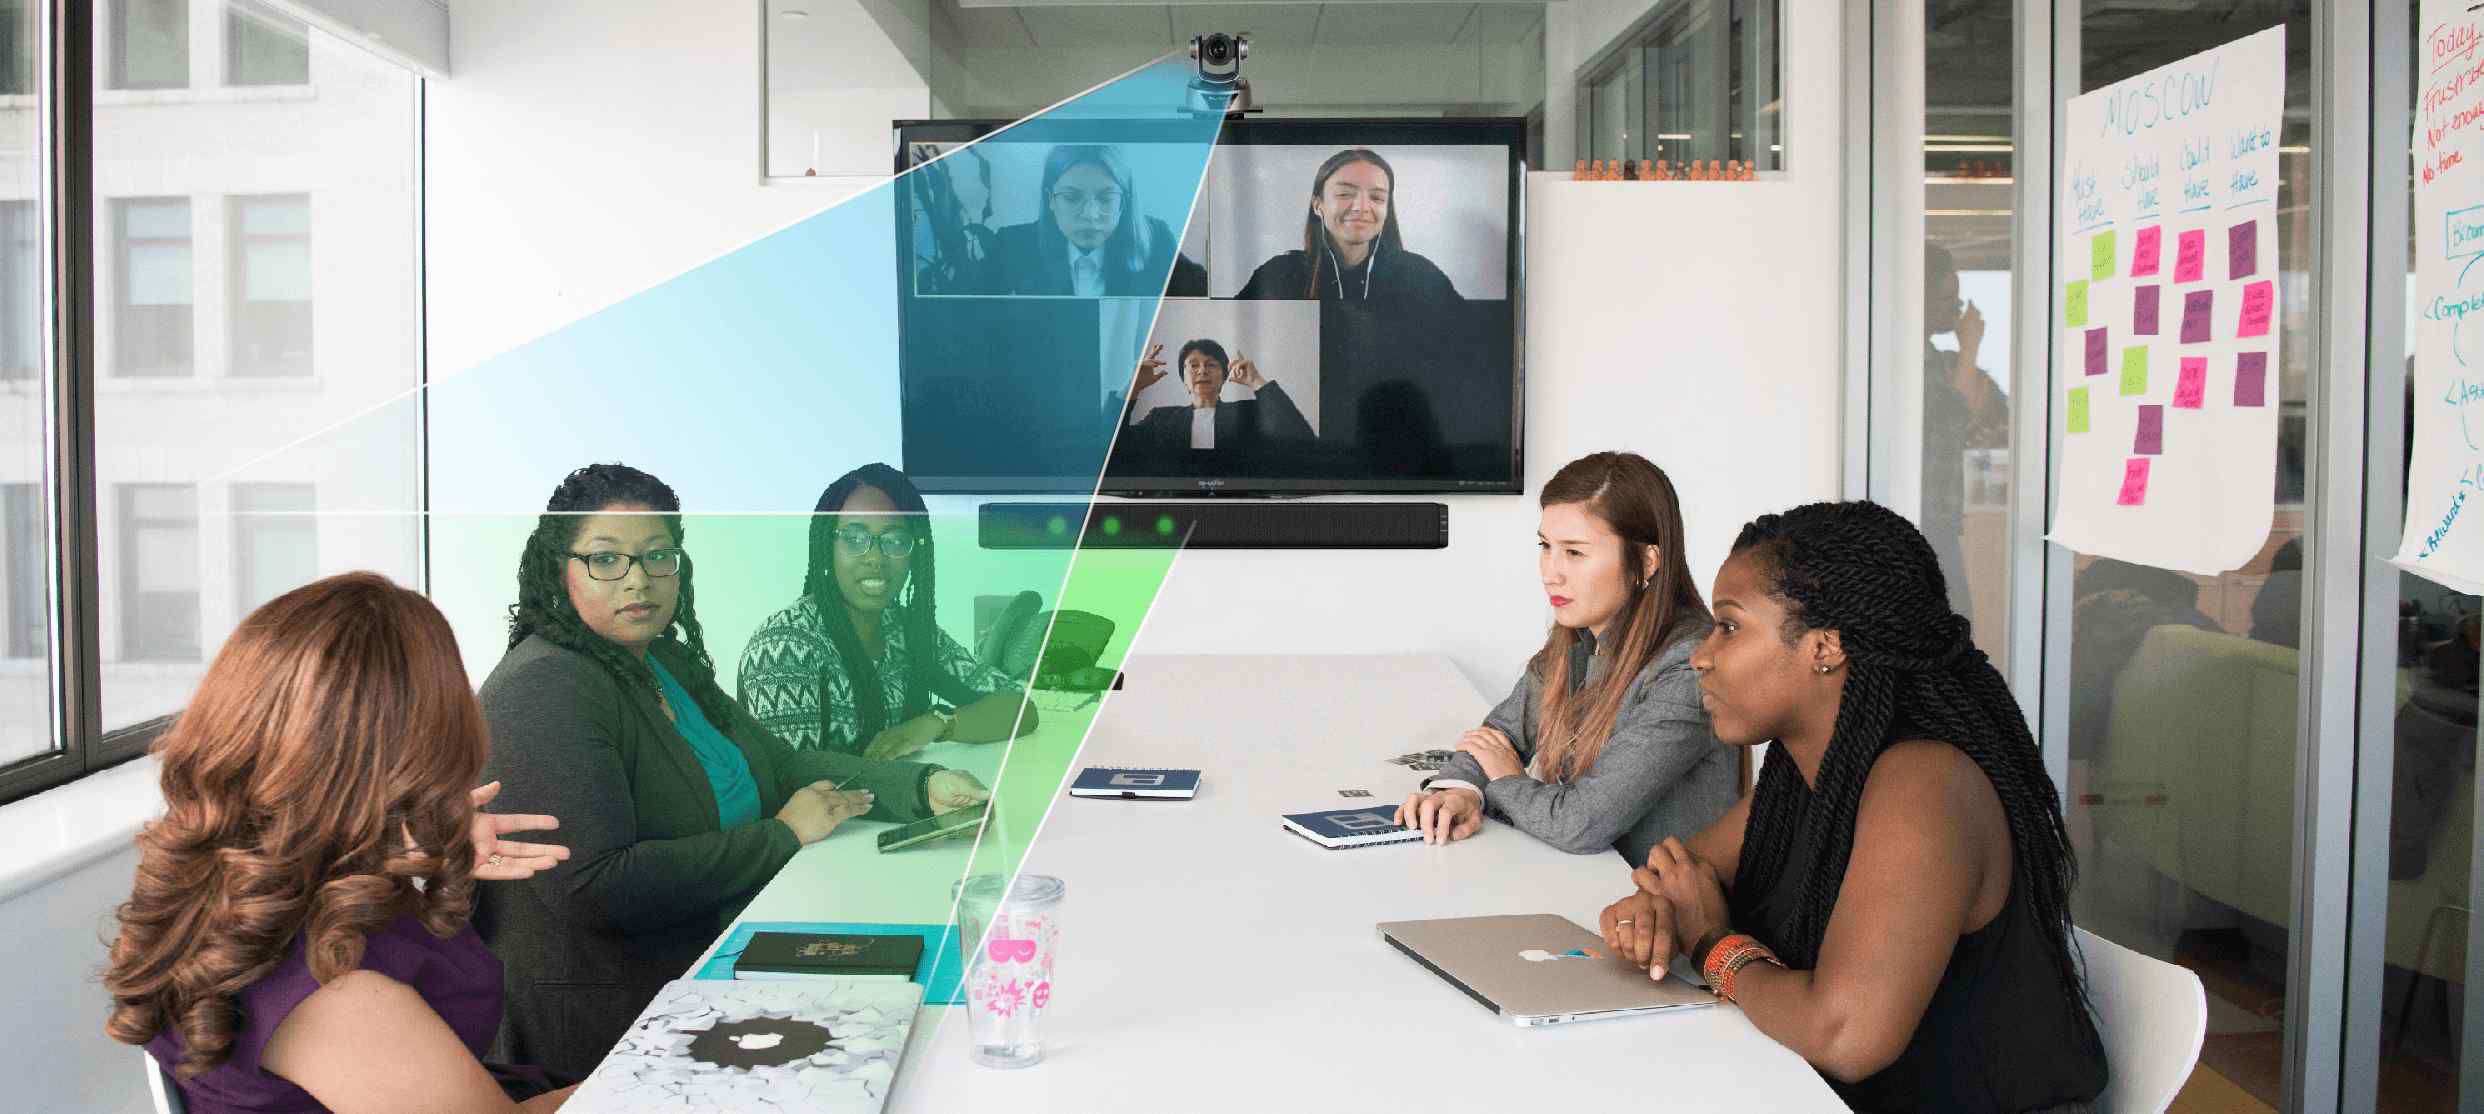 Women in a meeting using LeCAMBIO conference room audio video solutions